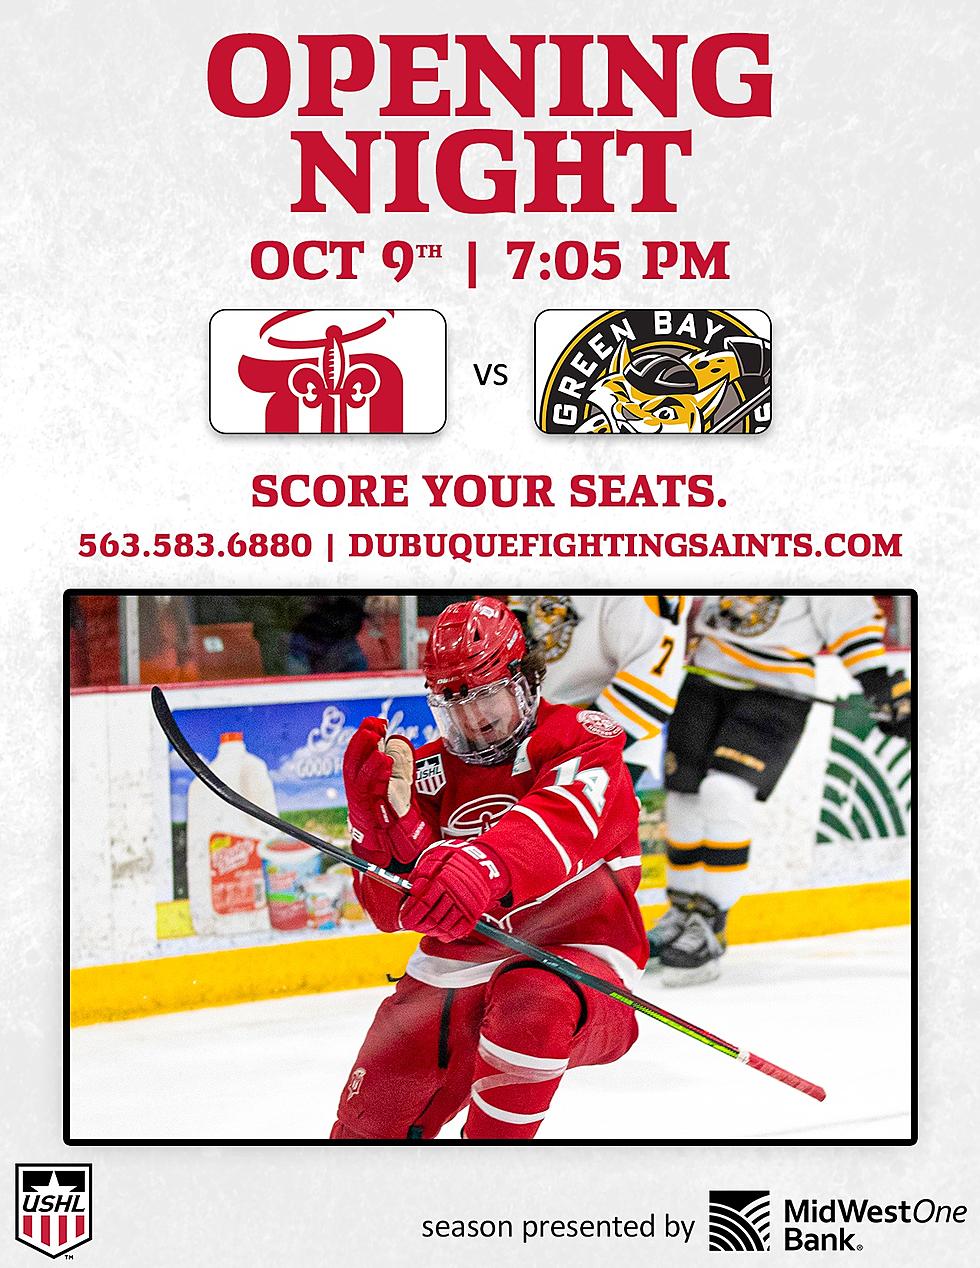 Dubuque Fighting Saints Hockey is BACK October 9th